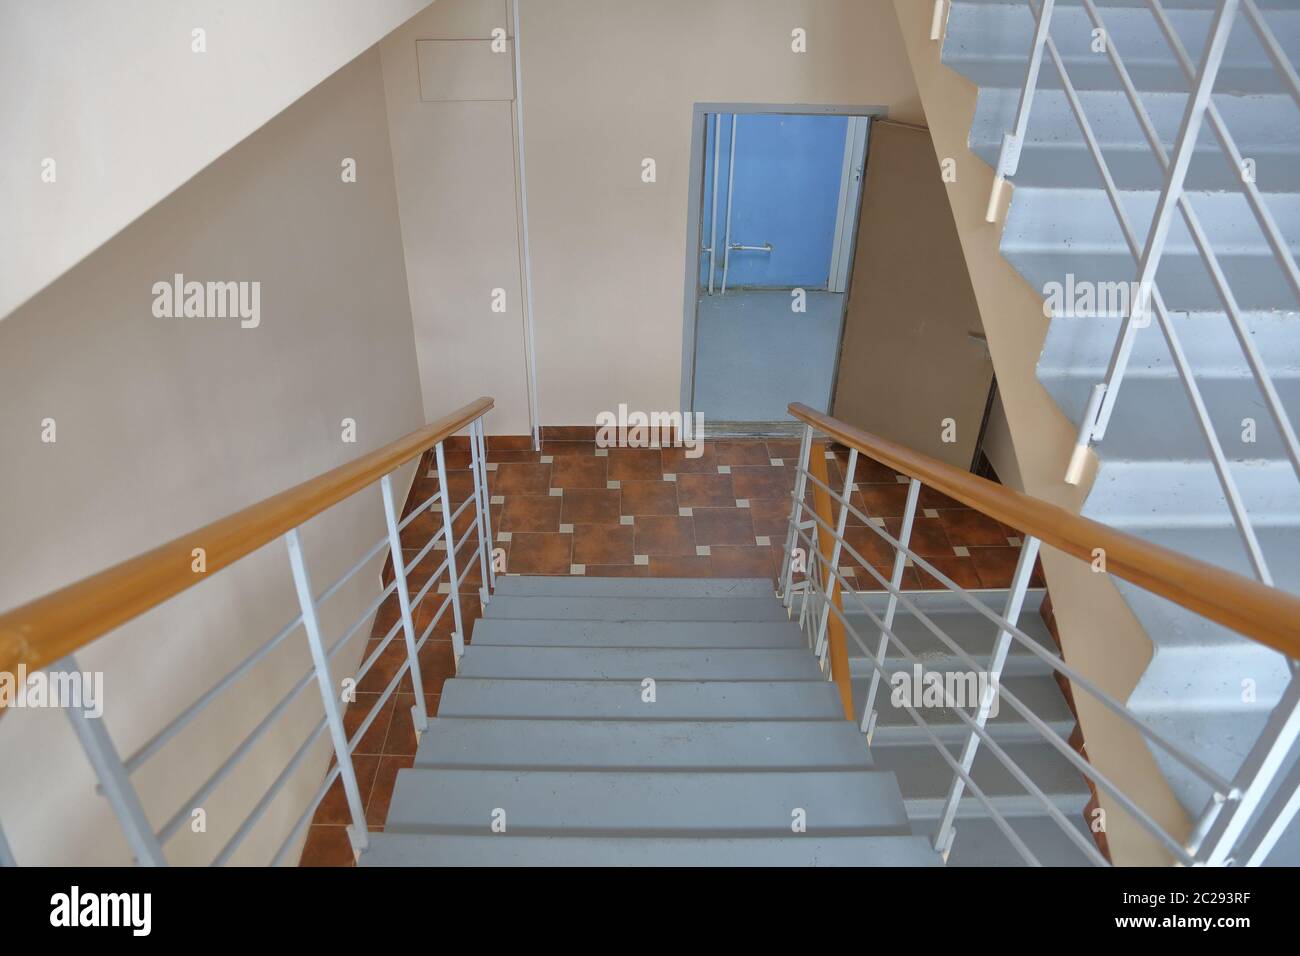 Staircase between floors in an empty office building Stock Photo